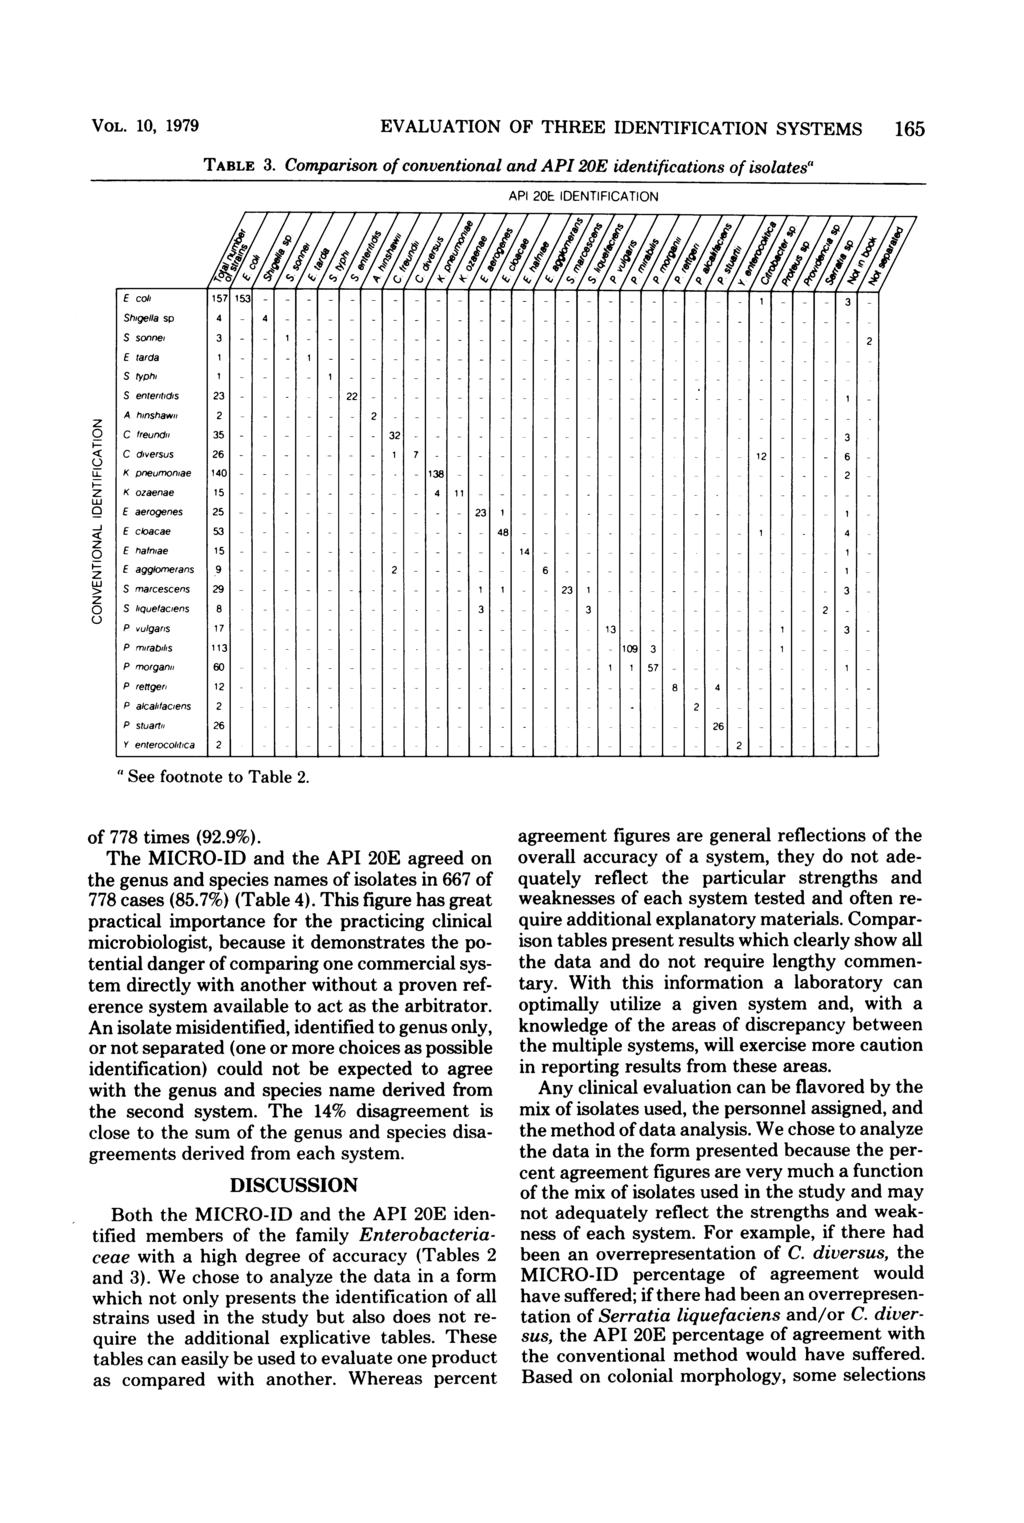 VOL. 1, 1979 TABLE 3. EVALUATION OF THREE IDENTIFICATION SYSTEMS 165 Comparison of conventional and API 2E identifications of isolates" API 2E IDENTIFICATION LL LU C] LU " See footnote to Table 2.